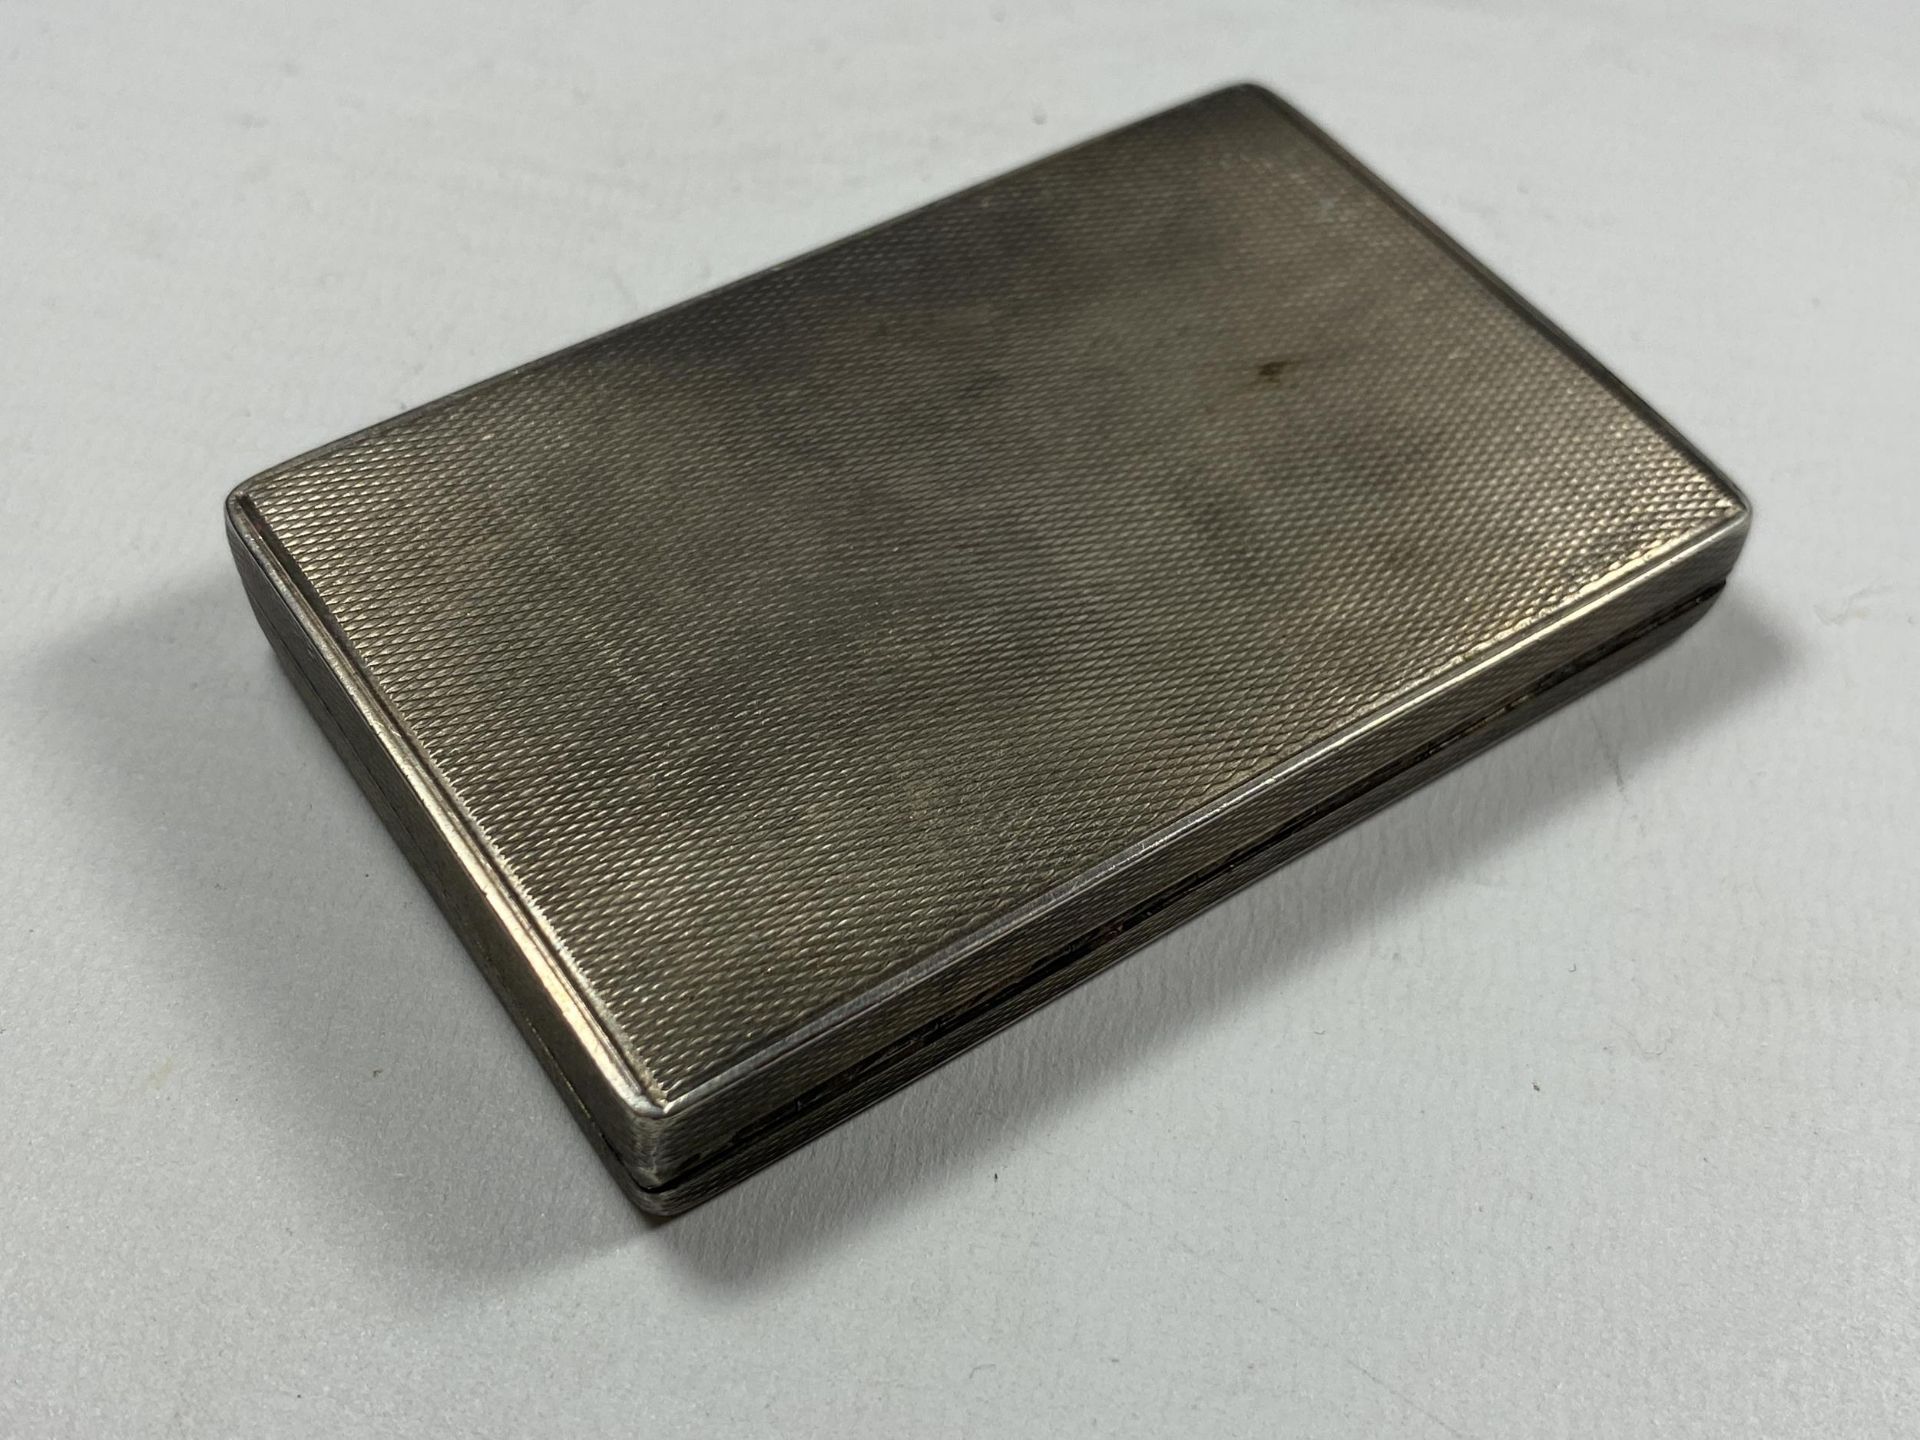 AN ART DECO .925 HALLMARKED SILVER CARD CASE, IMPORT HALLMARKS TO INTERIOR, LENGTH 8CM - Image 3 of 5